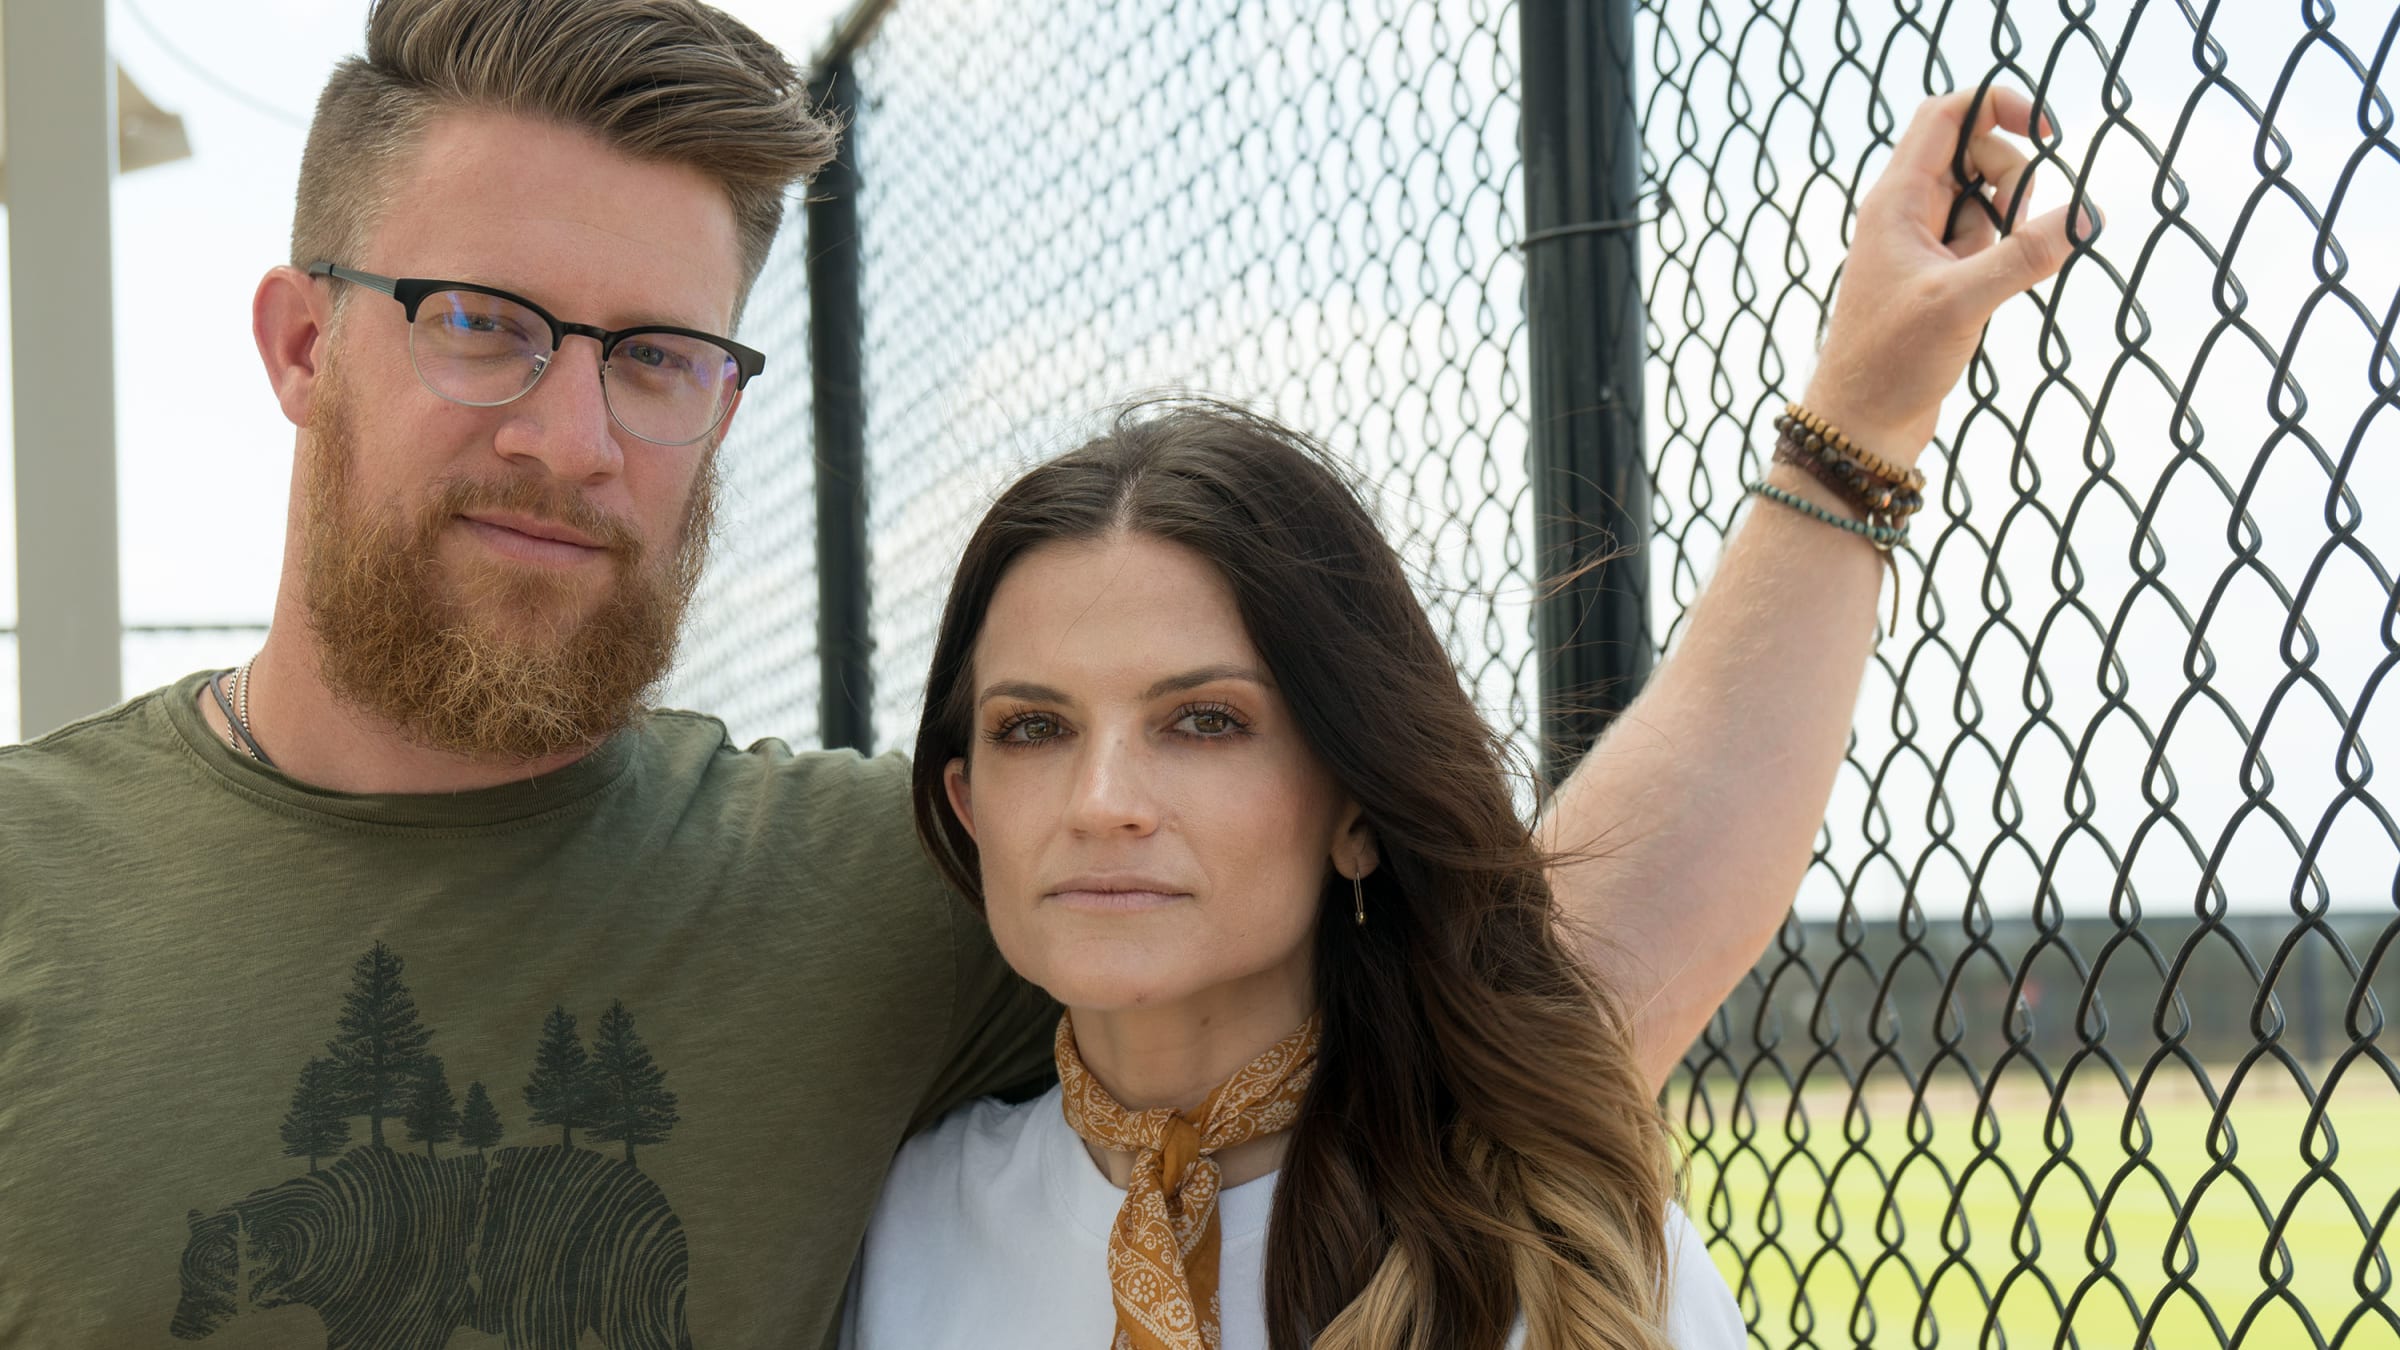 Socialist Star Pitcher Sean Doolittle and Wife Speak Out on MLB's